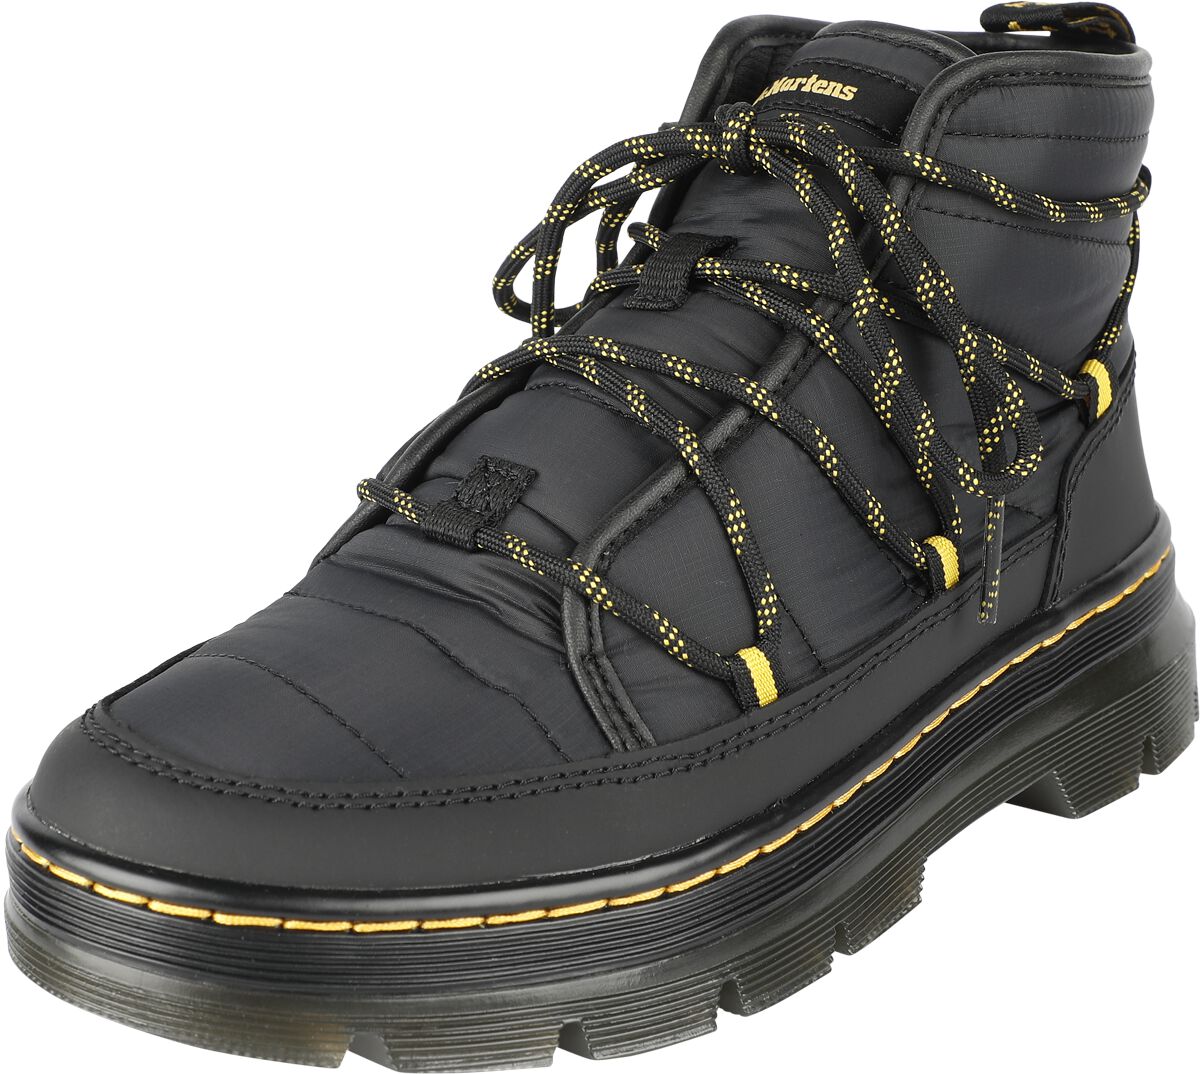 Dr. Martens Combs W Padded Boot schwarz in EU41